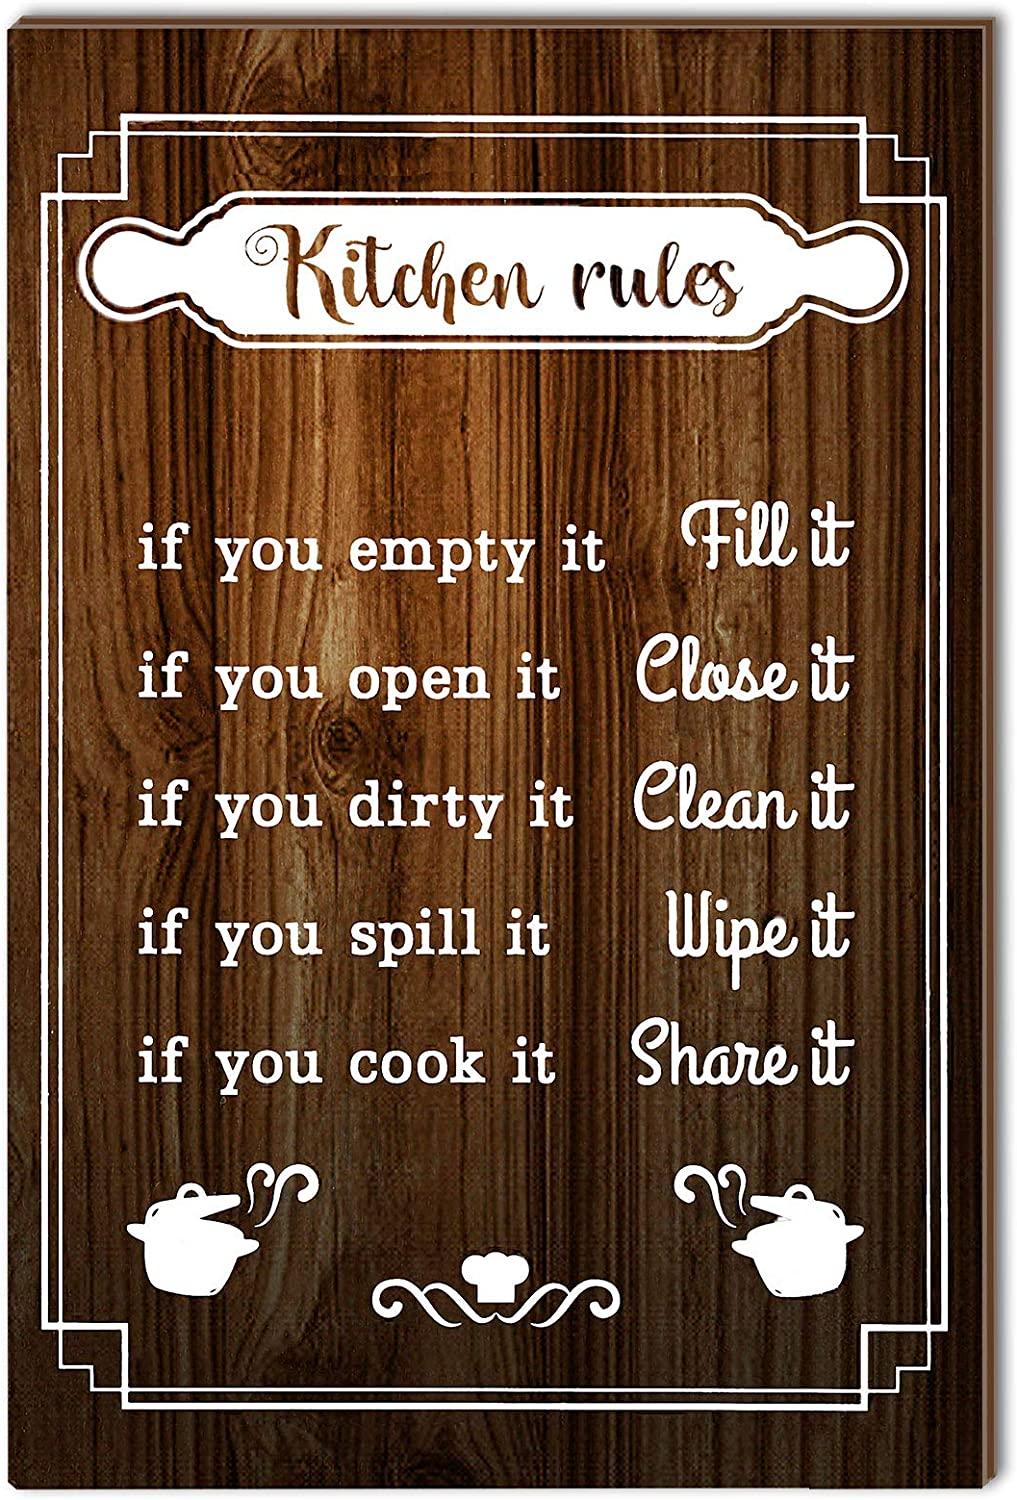 https://www.wideopencountry.com/wp-content/uploads/sites/4/eats/2021/03/Jetec-Kitchen-Rules-Sign-Funny-Kitchen-Rules-Wall-Decor-Rustic-Wood-Kitchen-Sign-Farmhouse-Kitchen-Wood-Wall-Art-Decor-Wood-Plaque-Hanging-Sign-for-Home-Housewarming-Kitchen-Decor-12-x-8-Inch-.jpg?resize=1017%2C1500